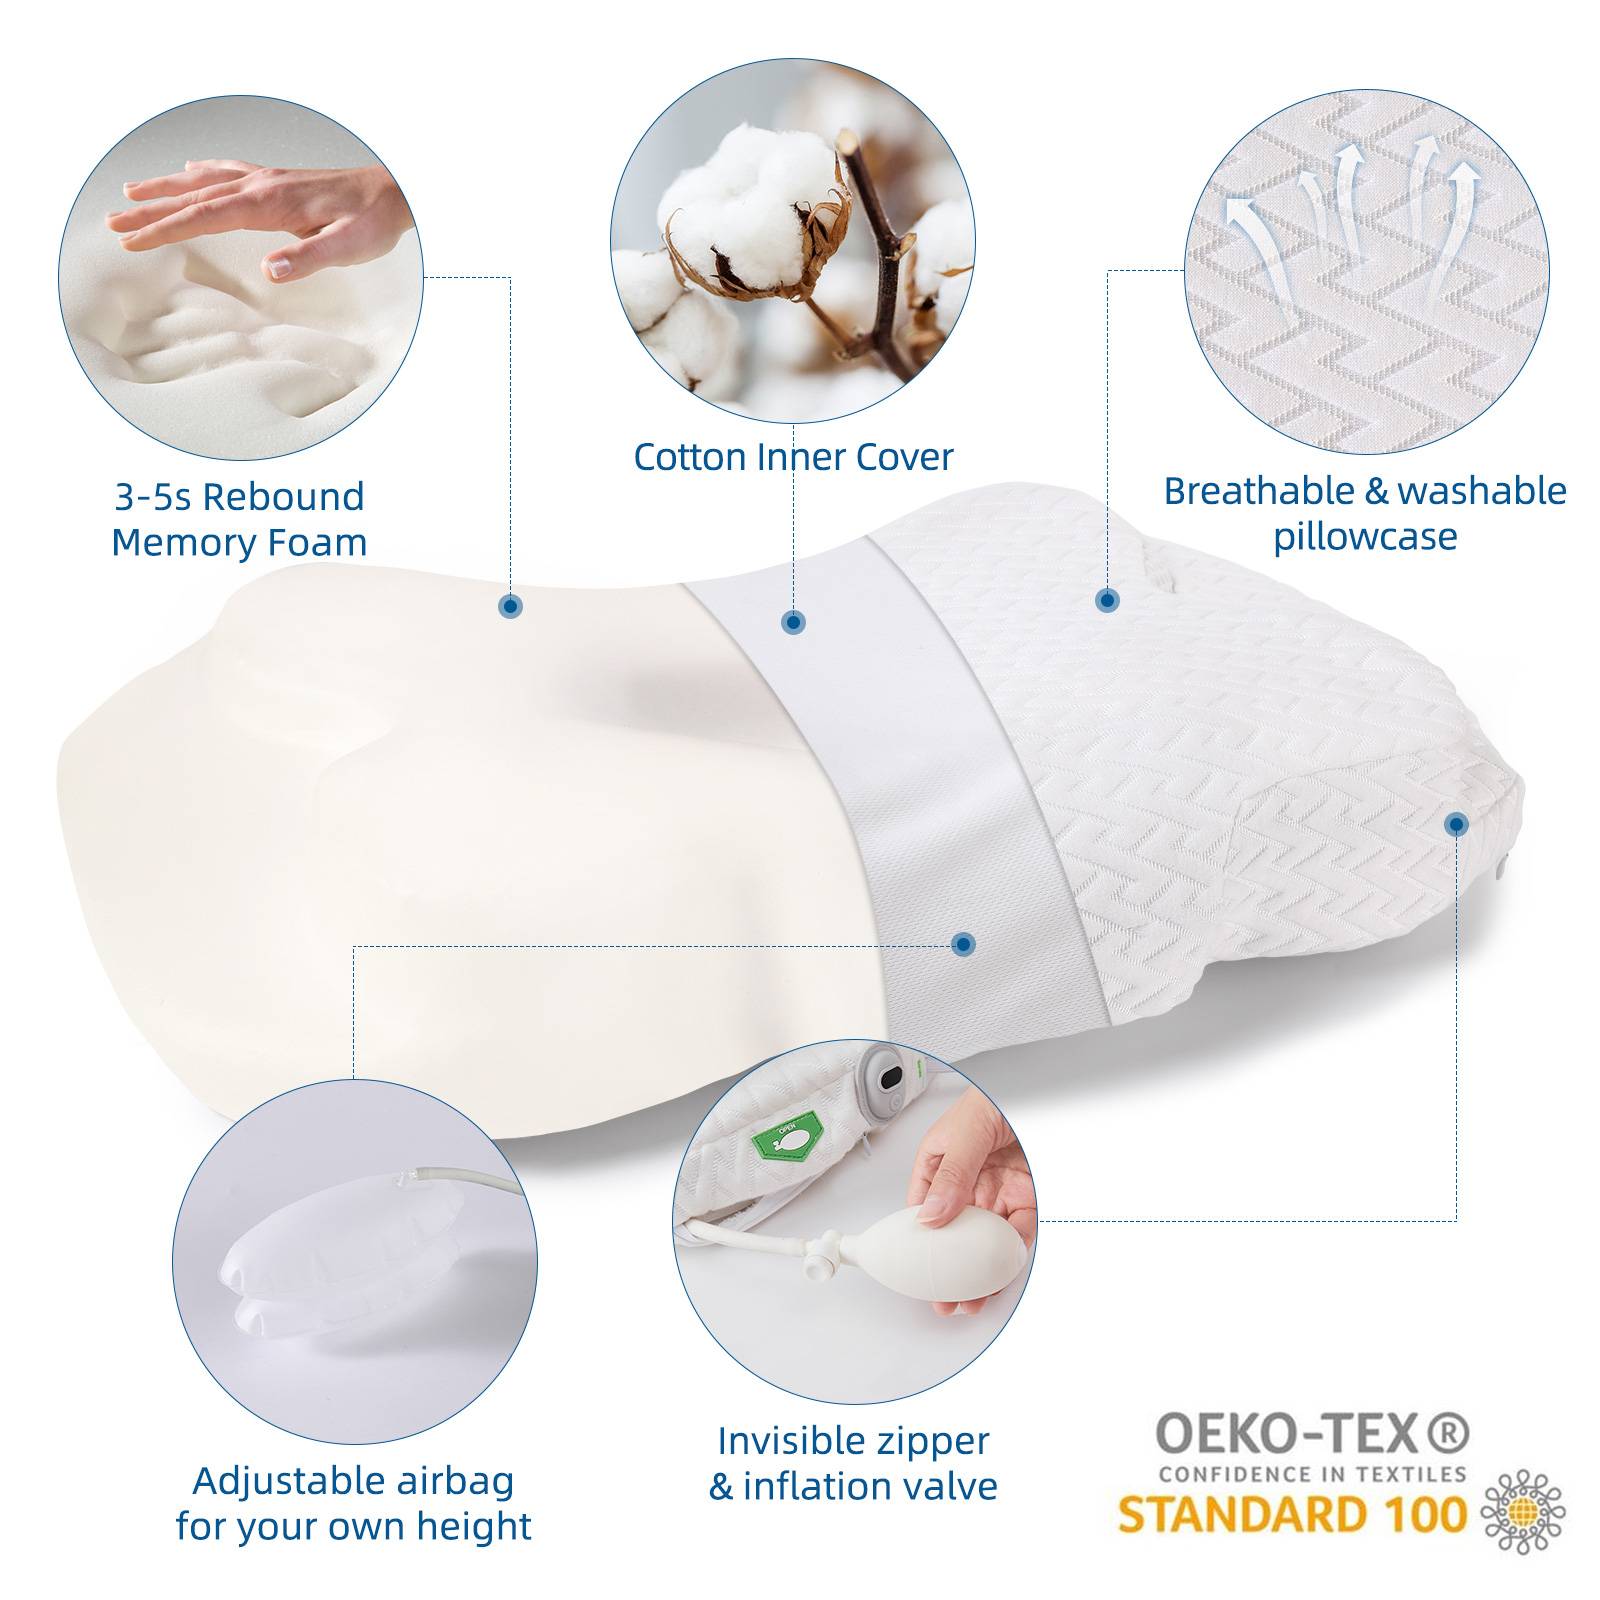 WSBArt Air Bag Adjustable Height Cervical Memory Foam Pillow, Odorless Neck Pillows for Pain Relief, Orthopedic Contour Pillows for Sleeping, Ergonomic Pillow for Side, Back and Stomach Sleepers